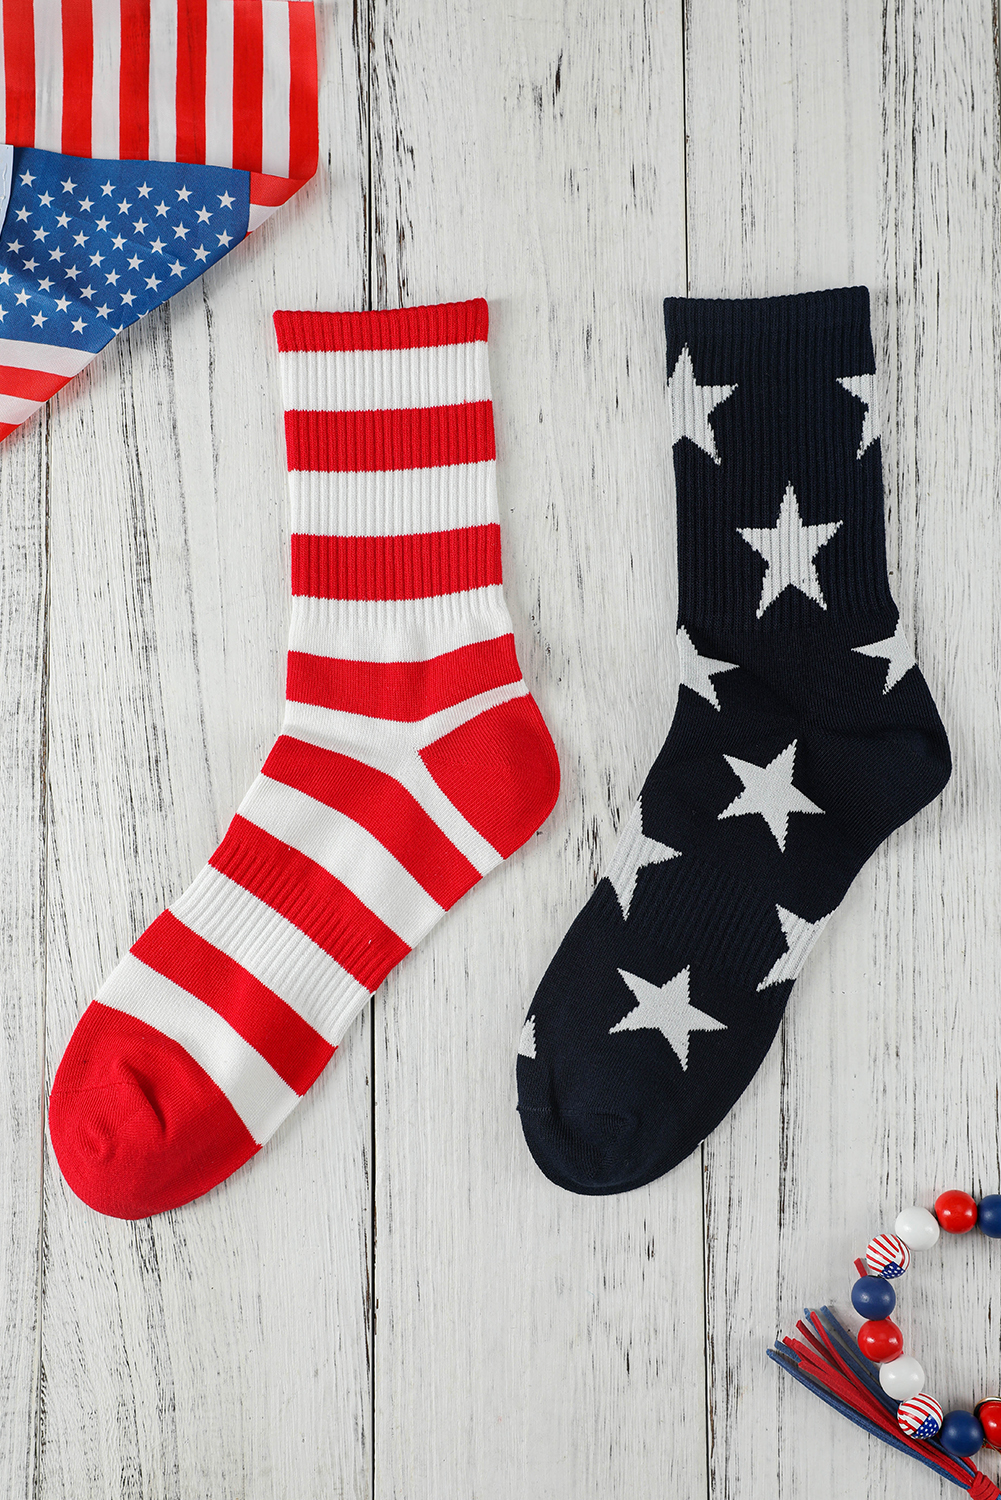 Fiery Red Stars and Stripes Pattern Knitted Crew SOCKS